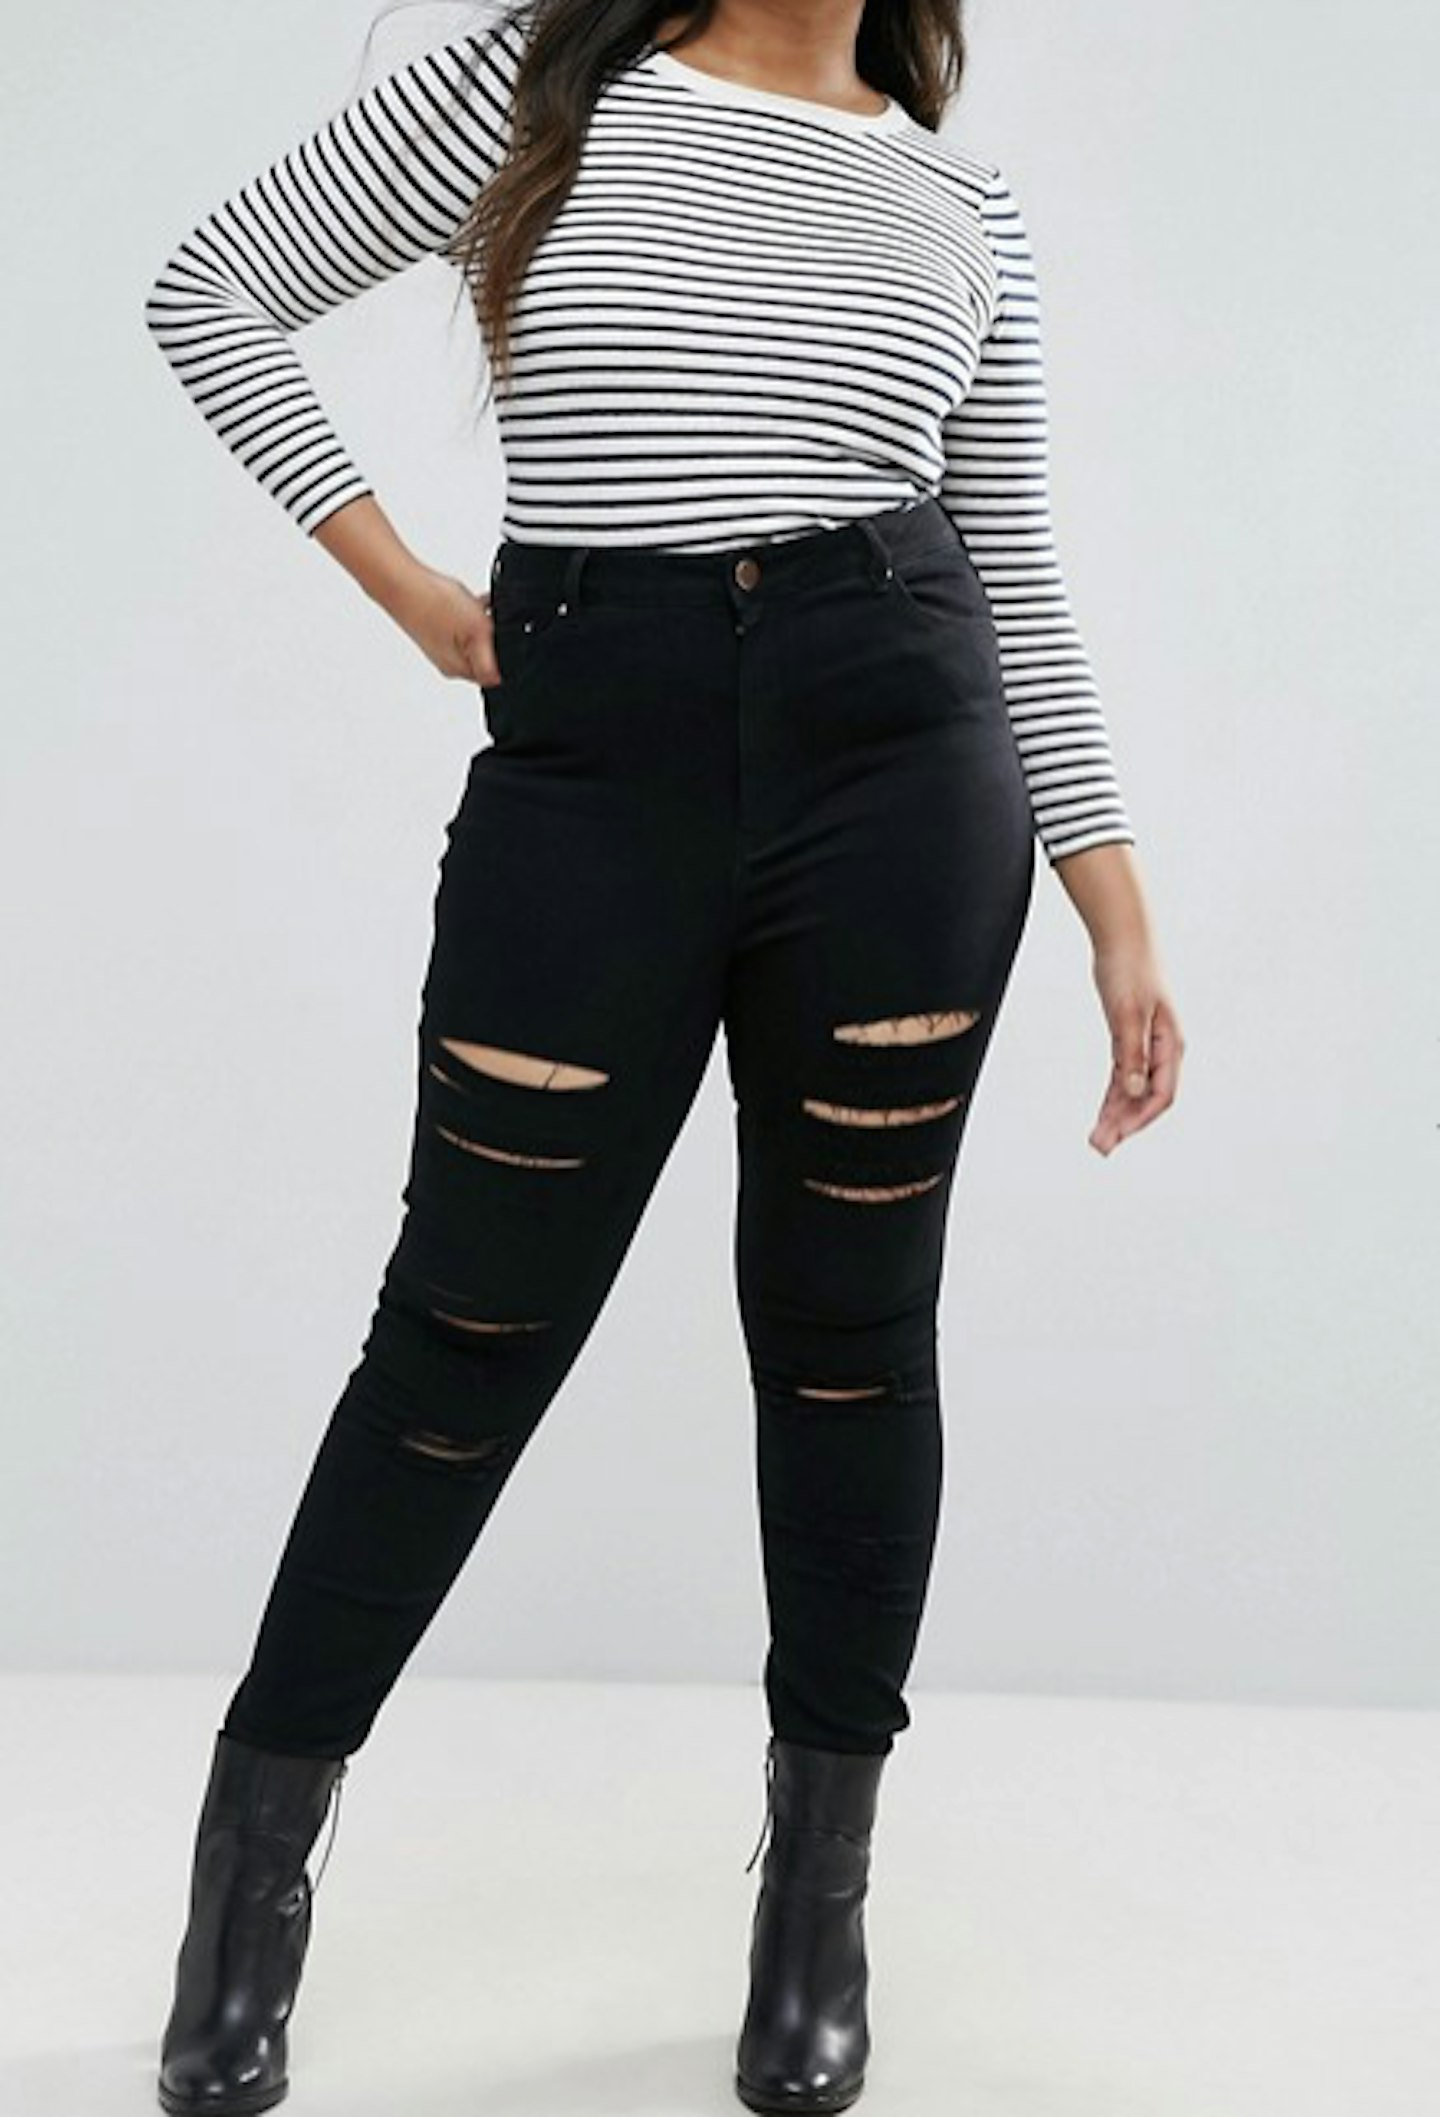 jeans trend ripped black